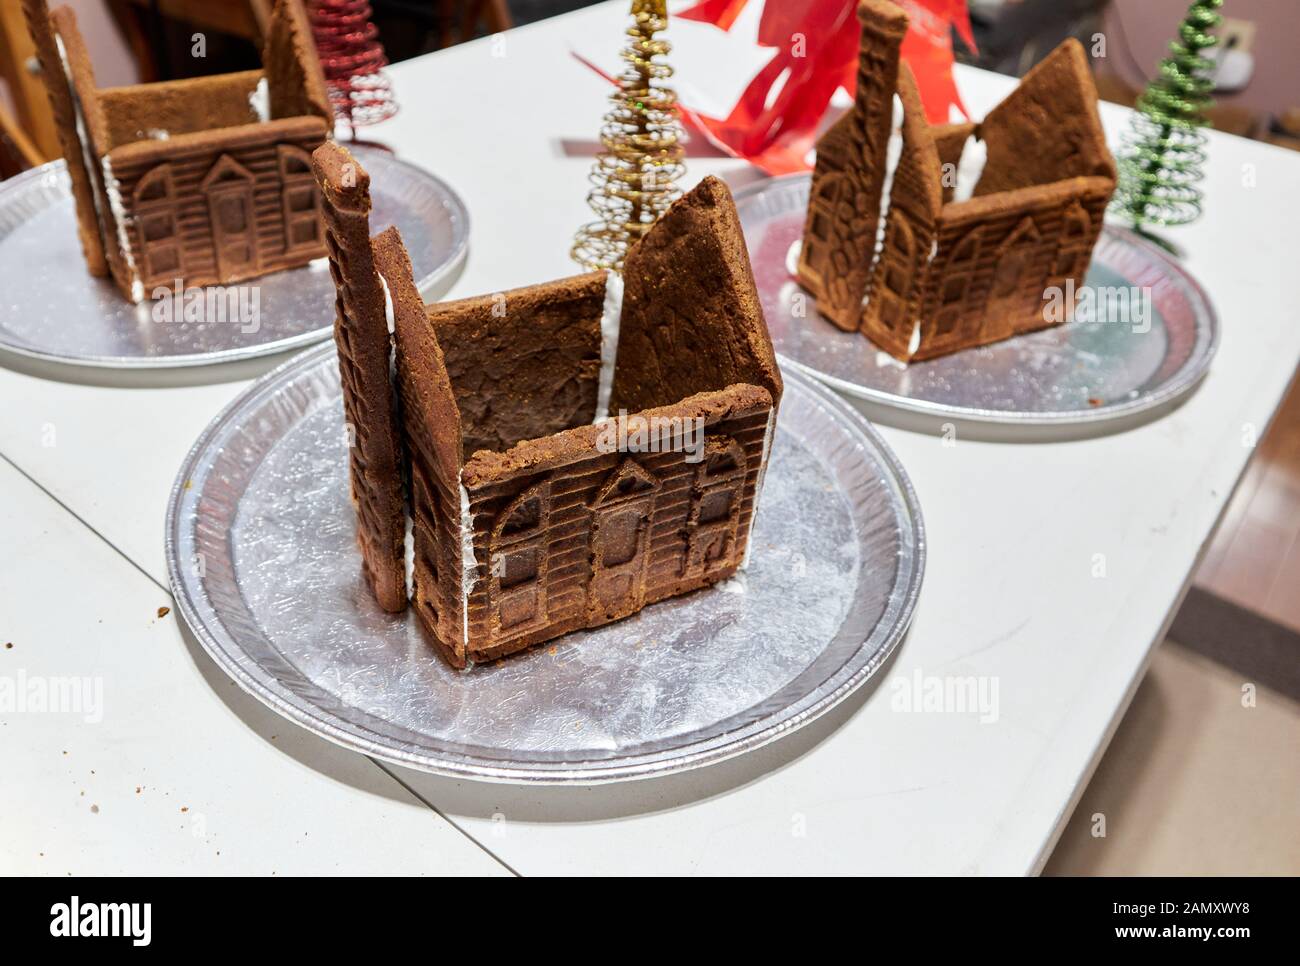 roofless, unadorned, gingerbread houses waiting for the icing to dry before putting the roofs on. Stock Photo